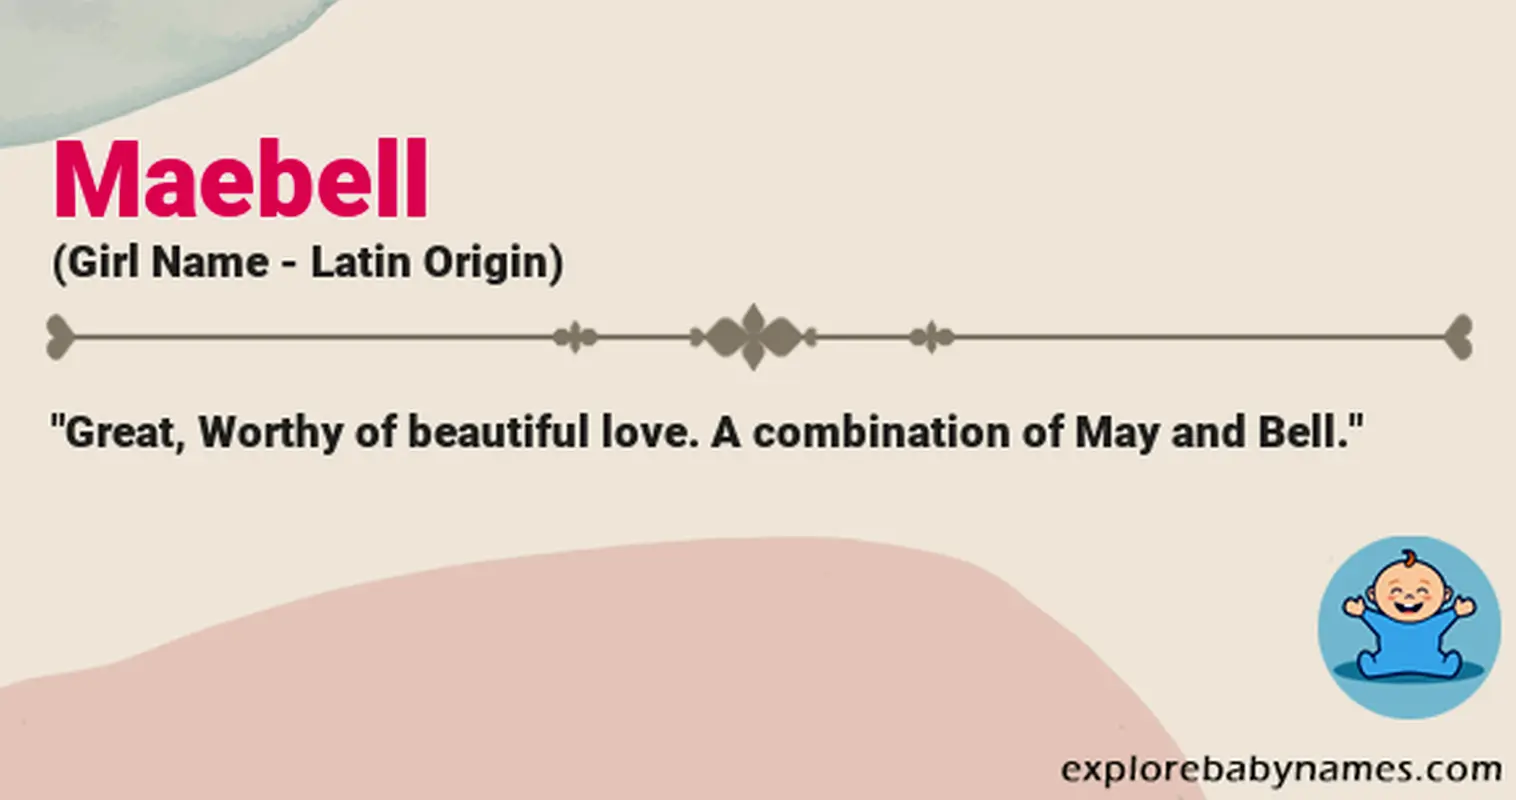 Meaning of Maebell